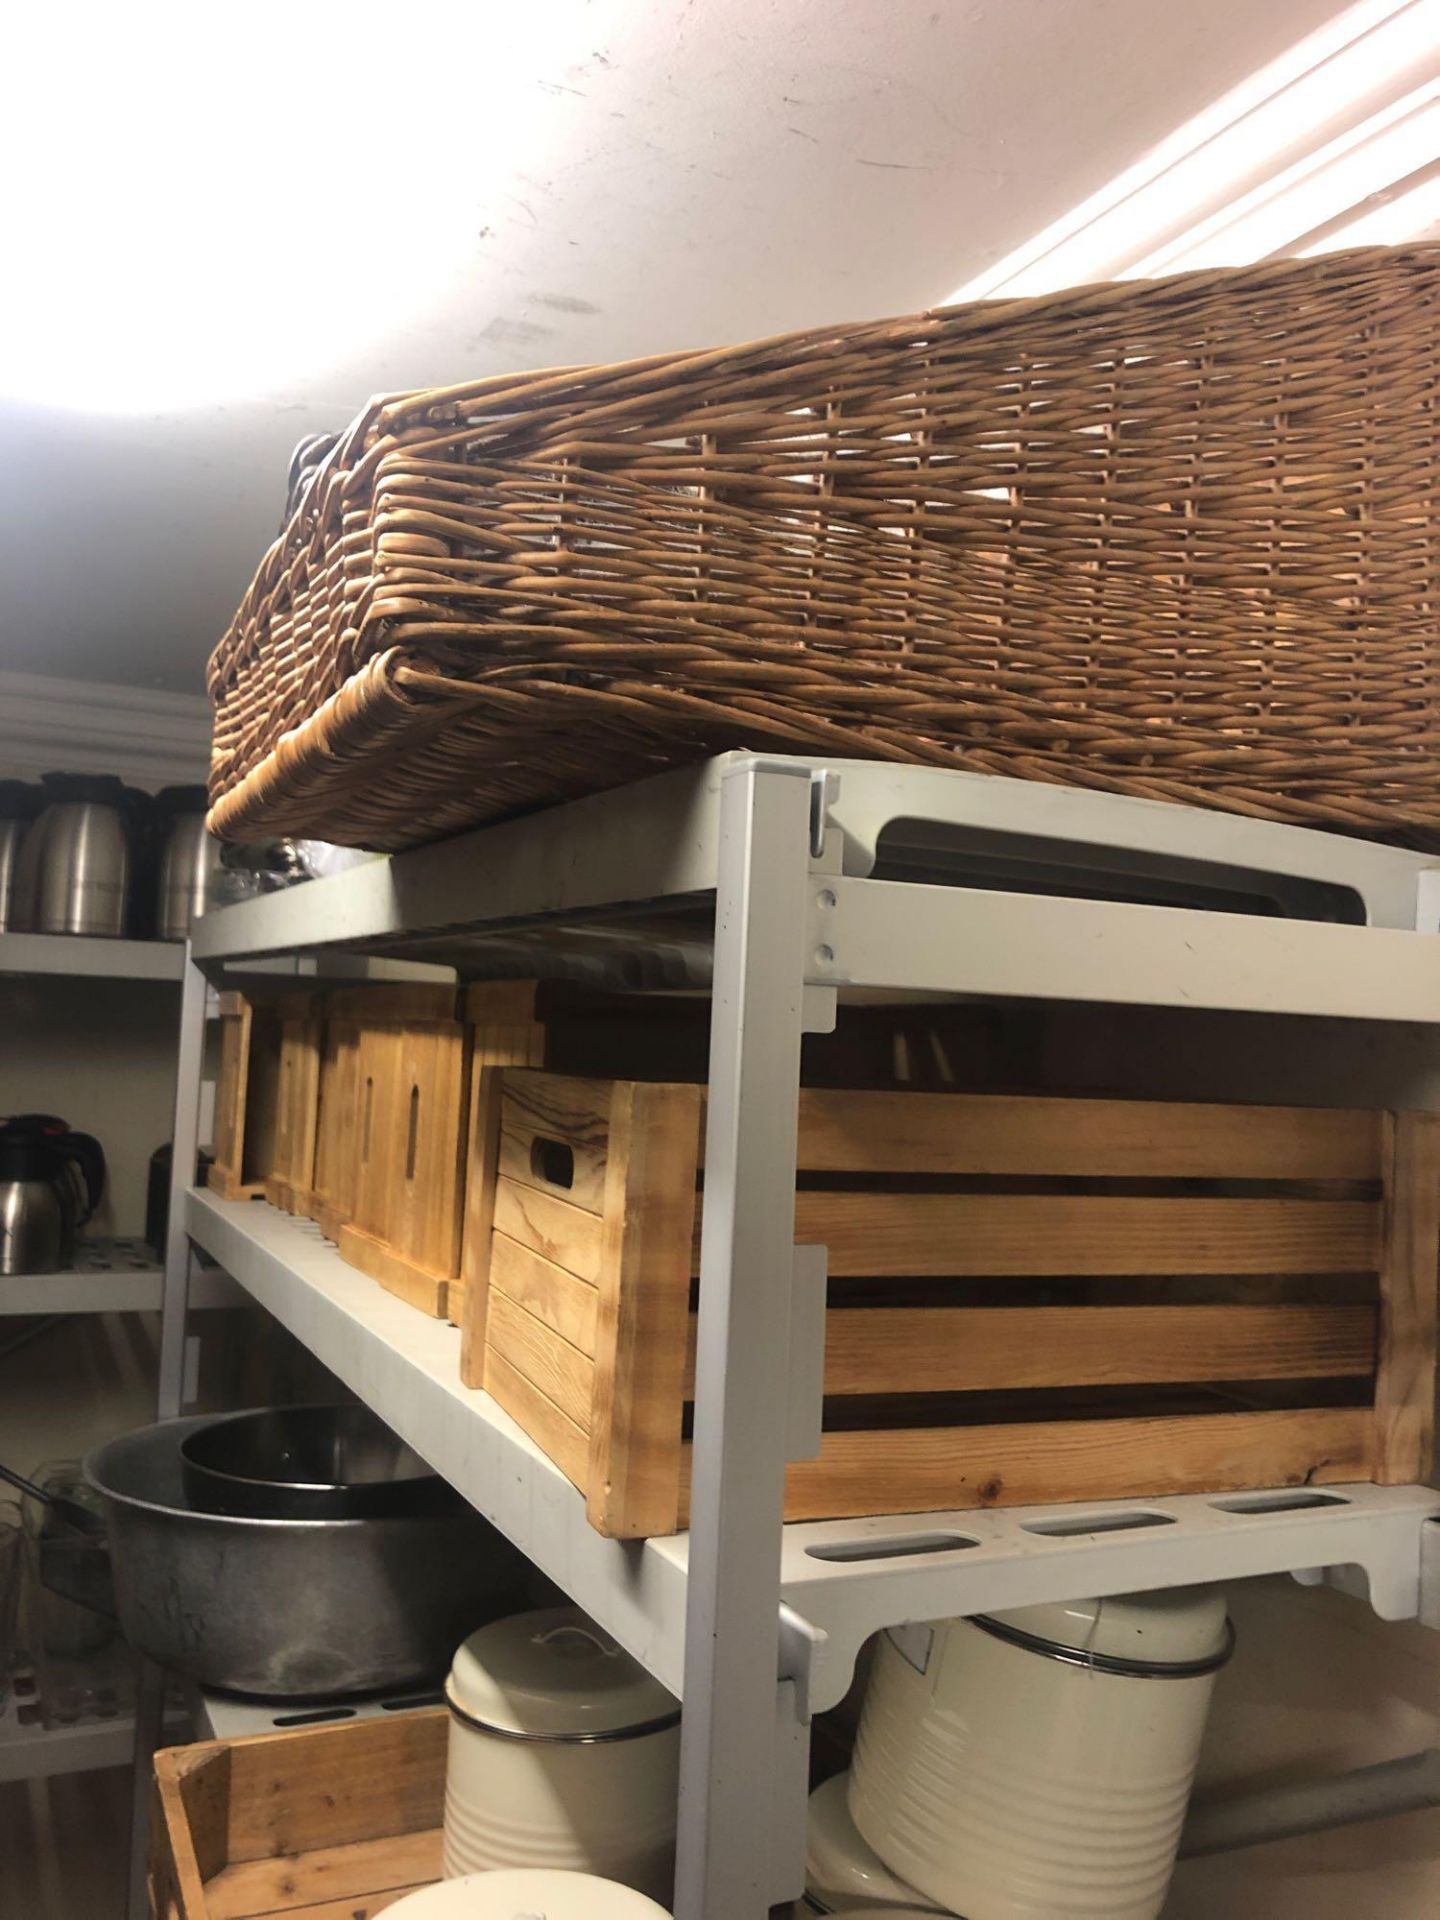 10 X Various Sizes Wooden Crates And Two Wicker Display Baskets - Image 2 of 2